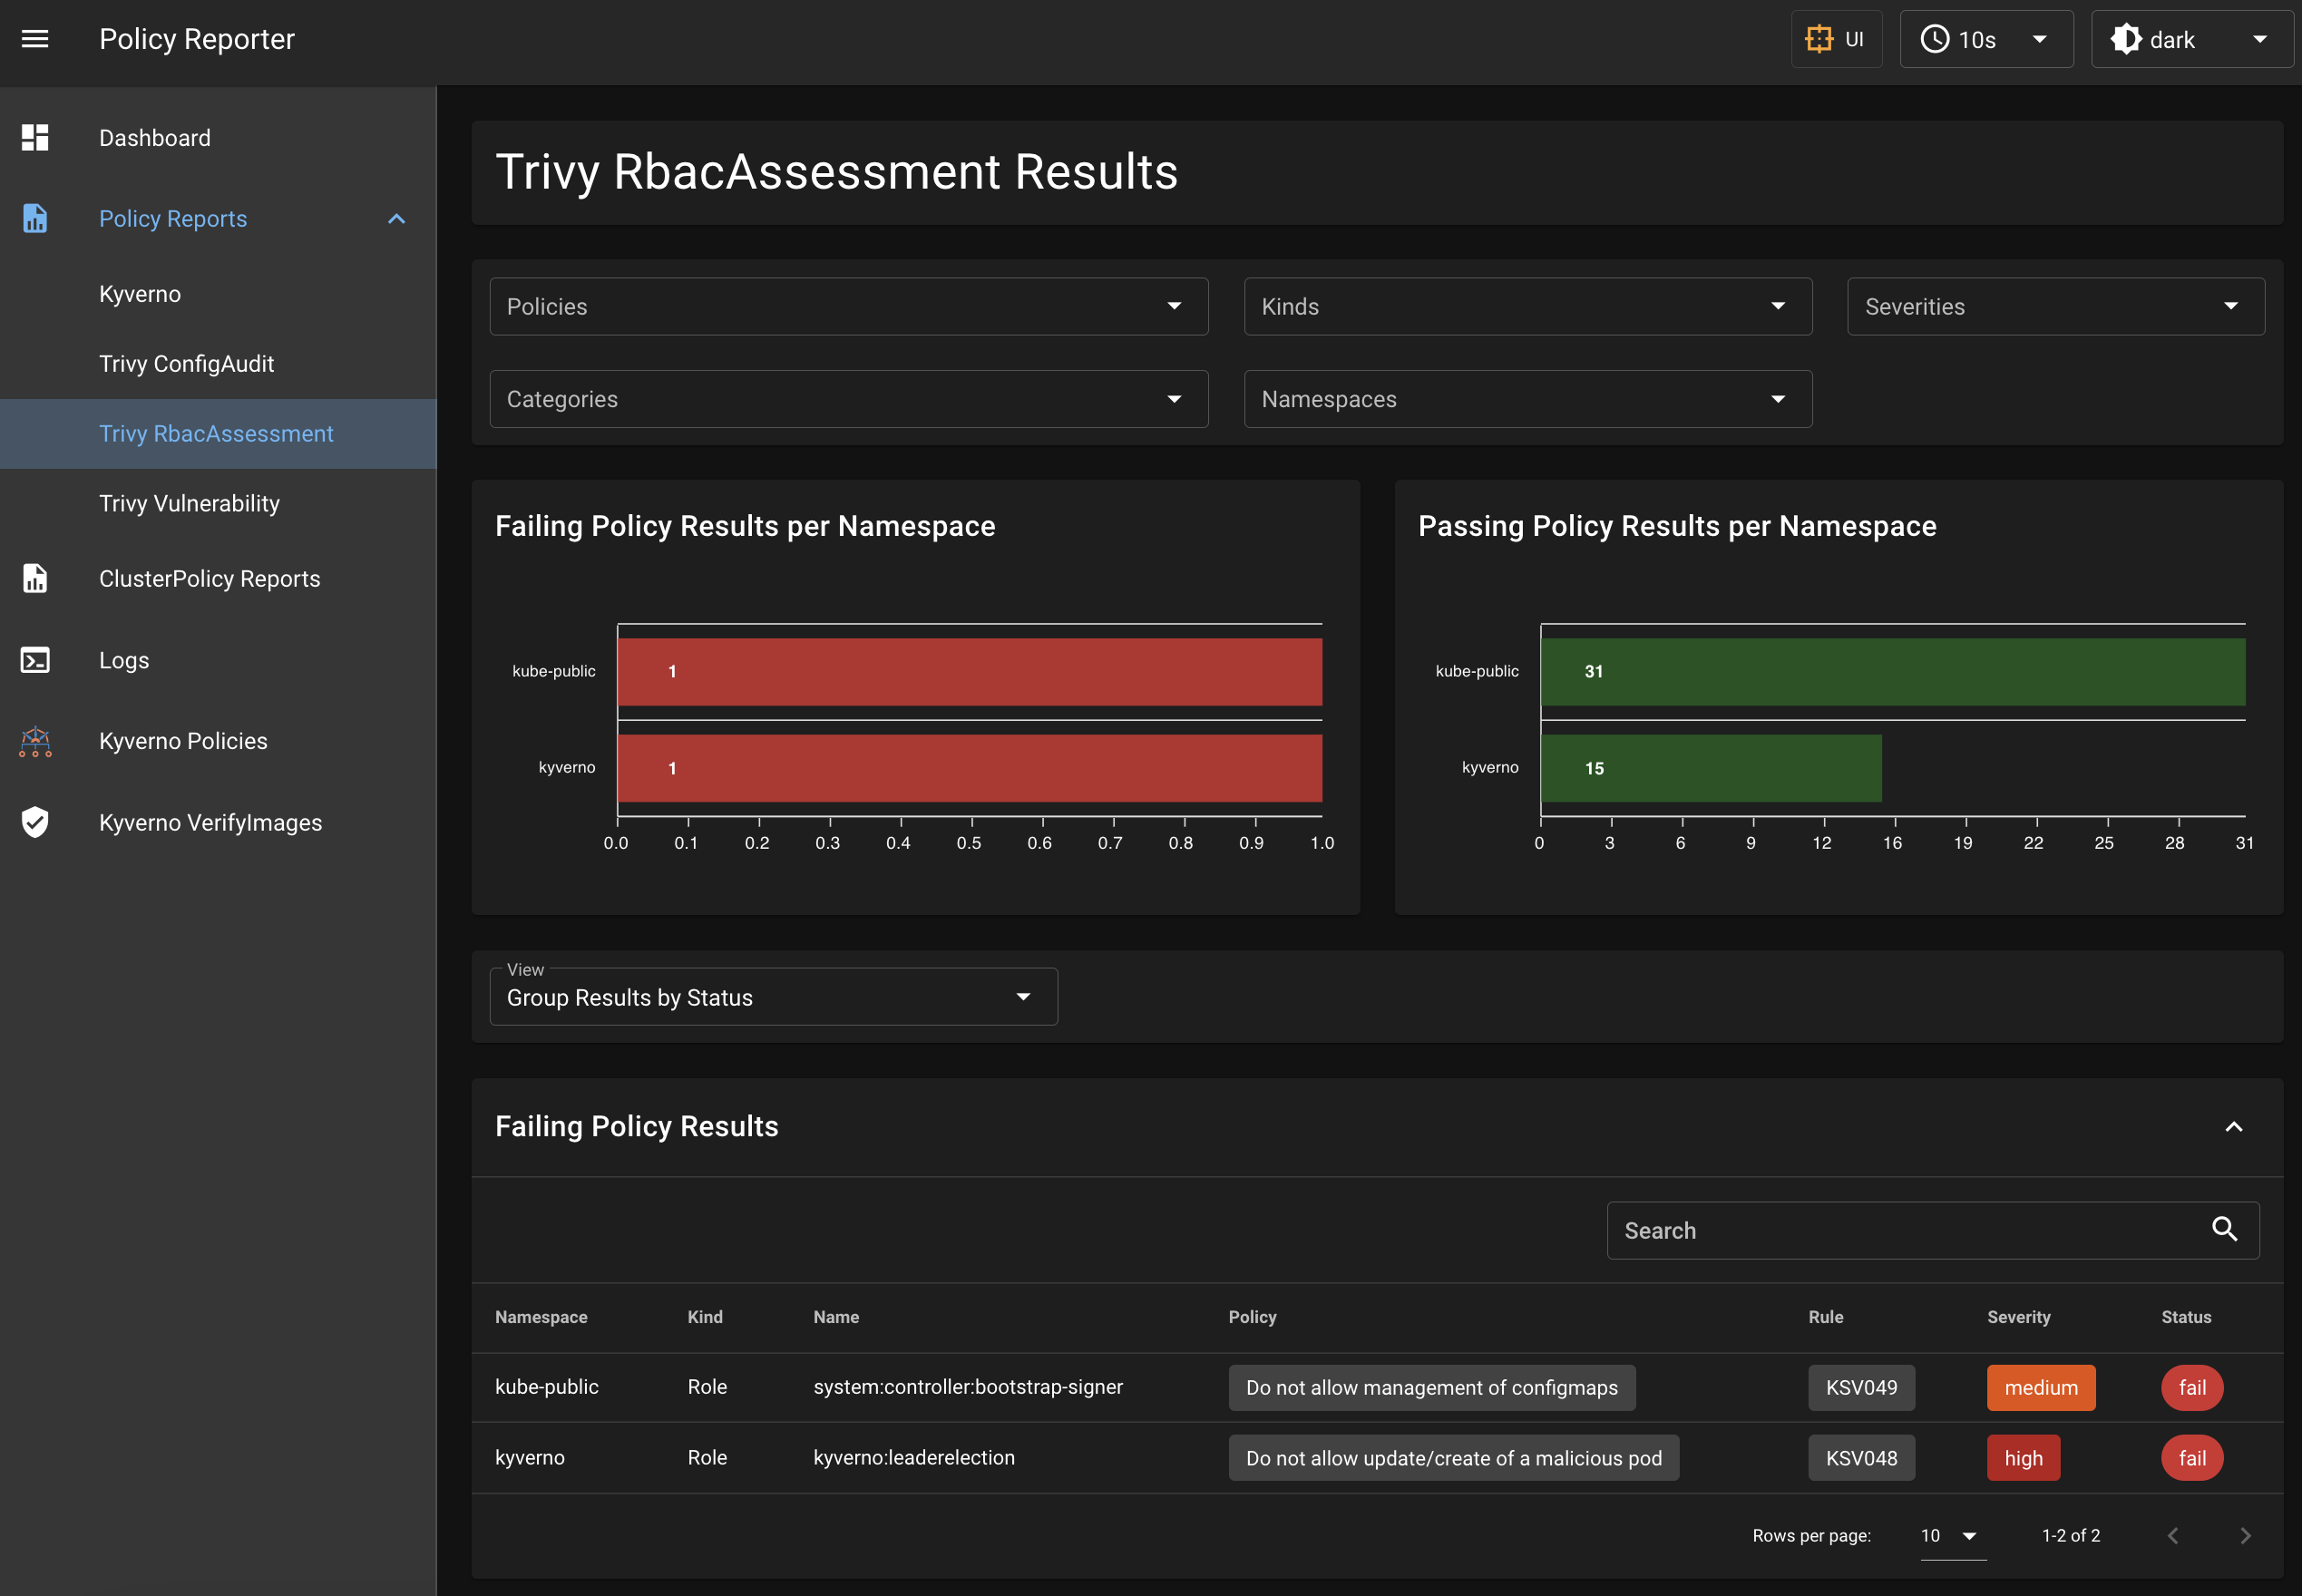 Policy Reporter UI with Dashboards for Kyverno and Trivy Operator